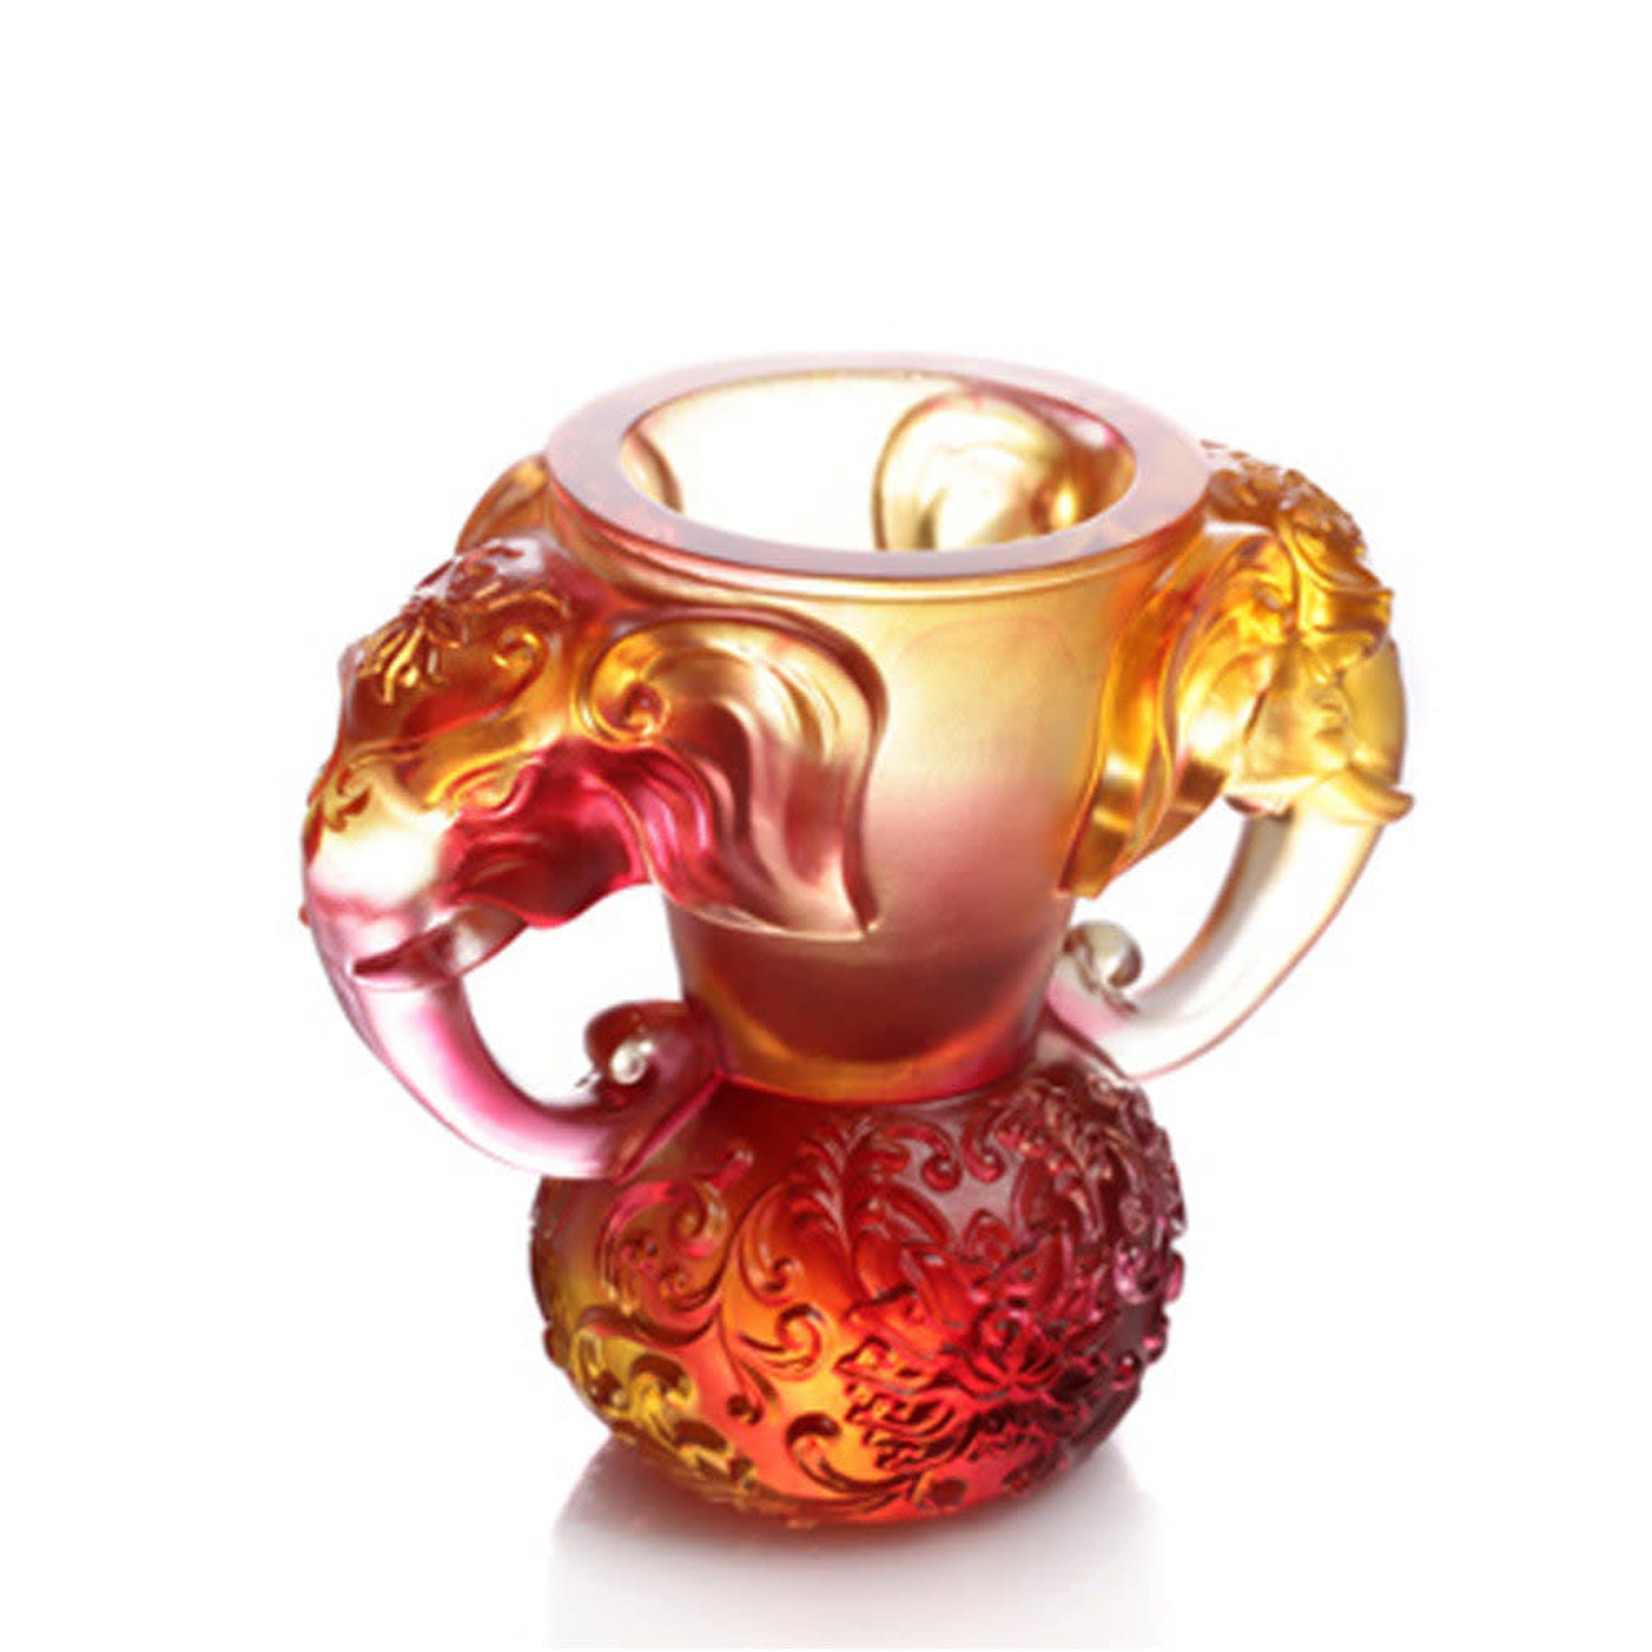 LIULI Crystal Art Crystal Elephant, "Full of Prosperity and Honor Around" - Amber/Red